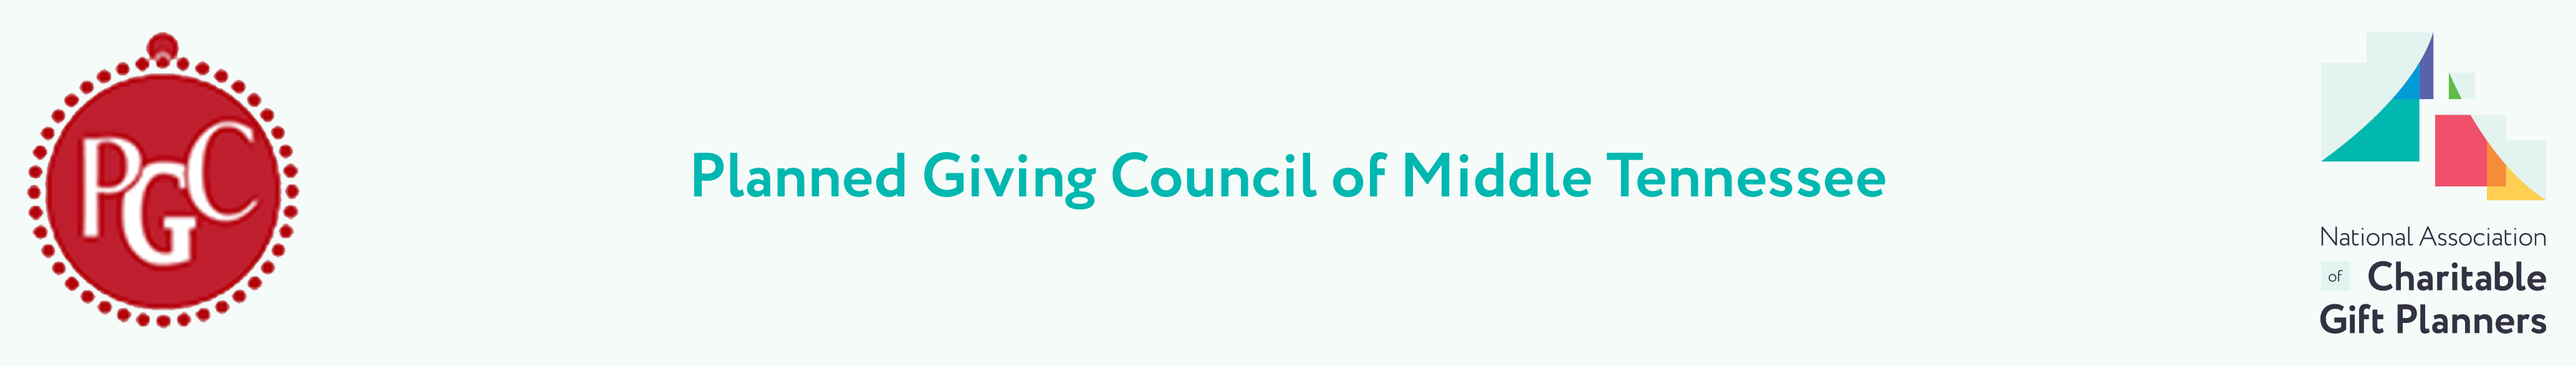 Planned Giving Council of Middle Tennessee